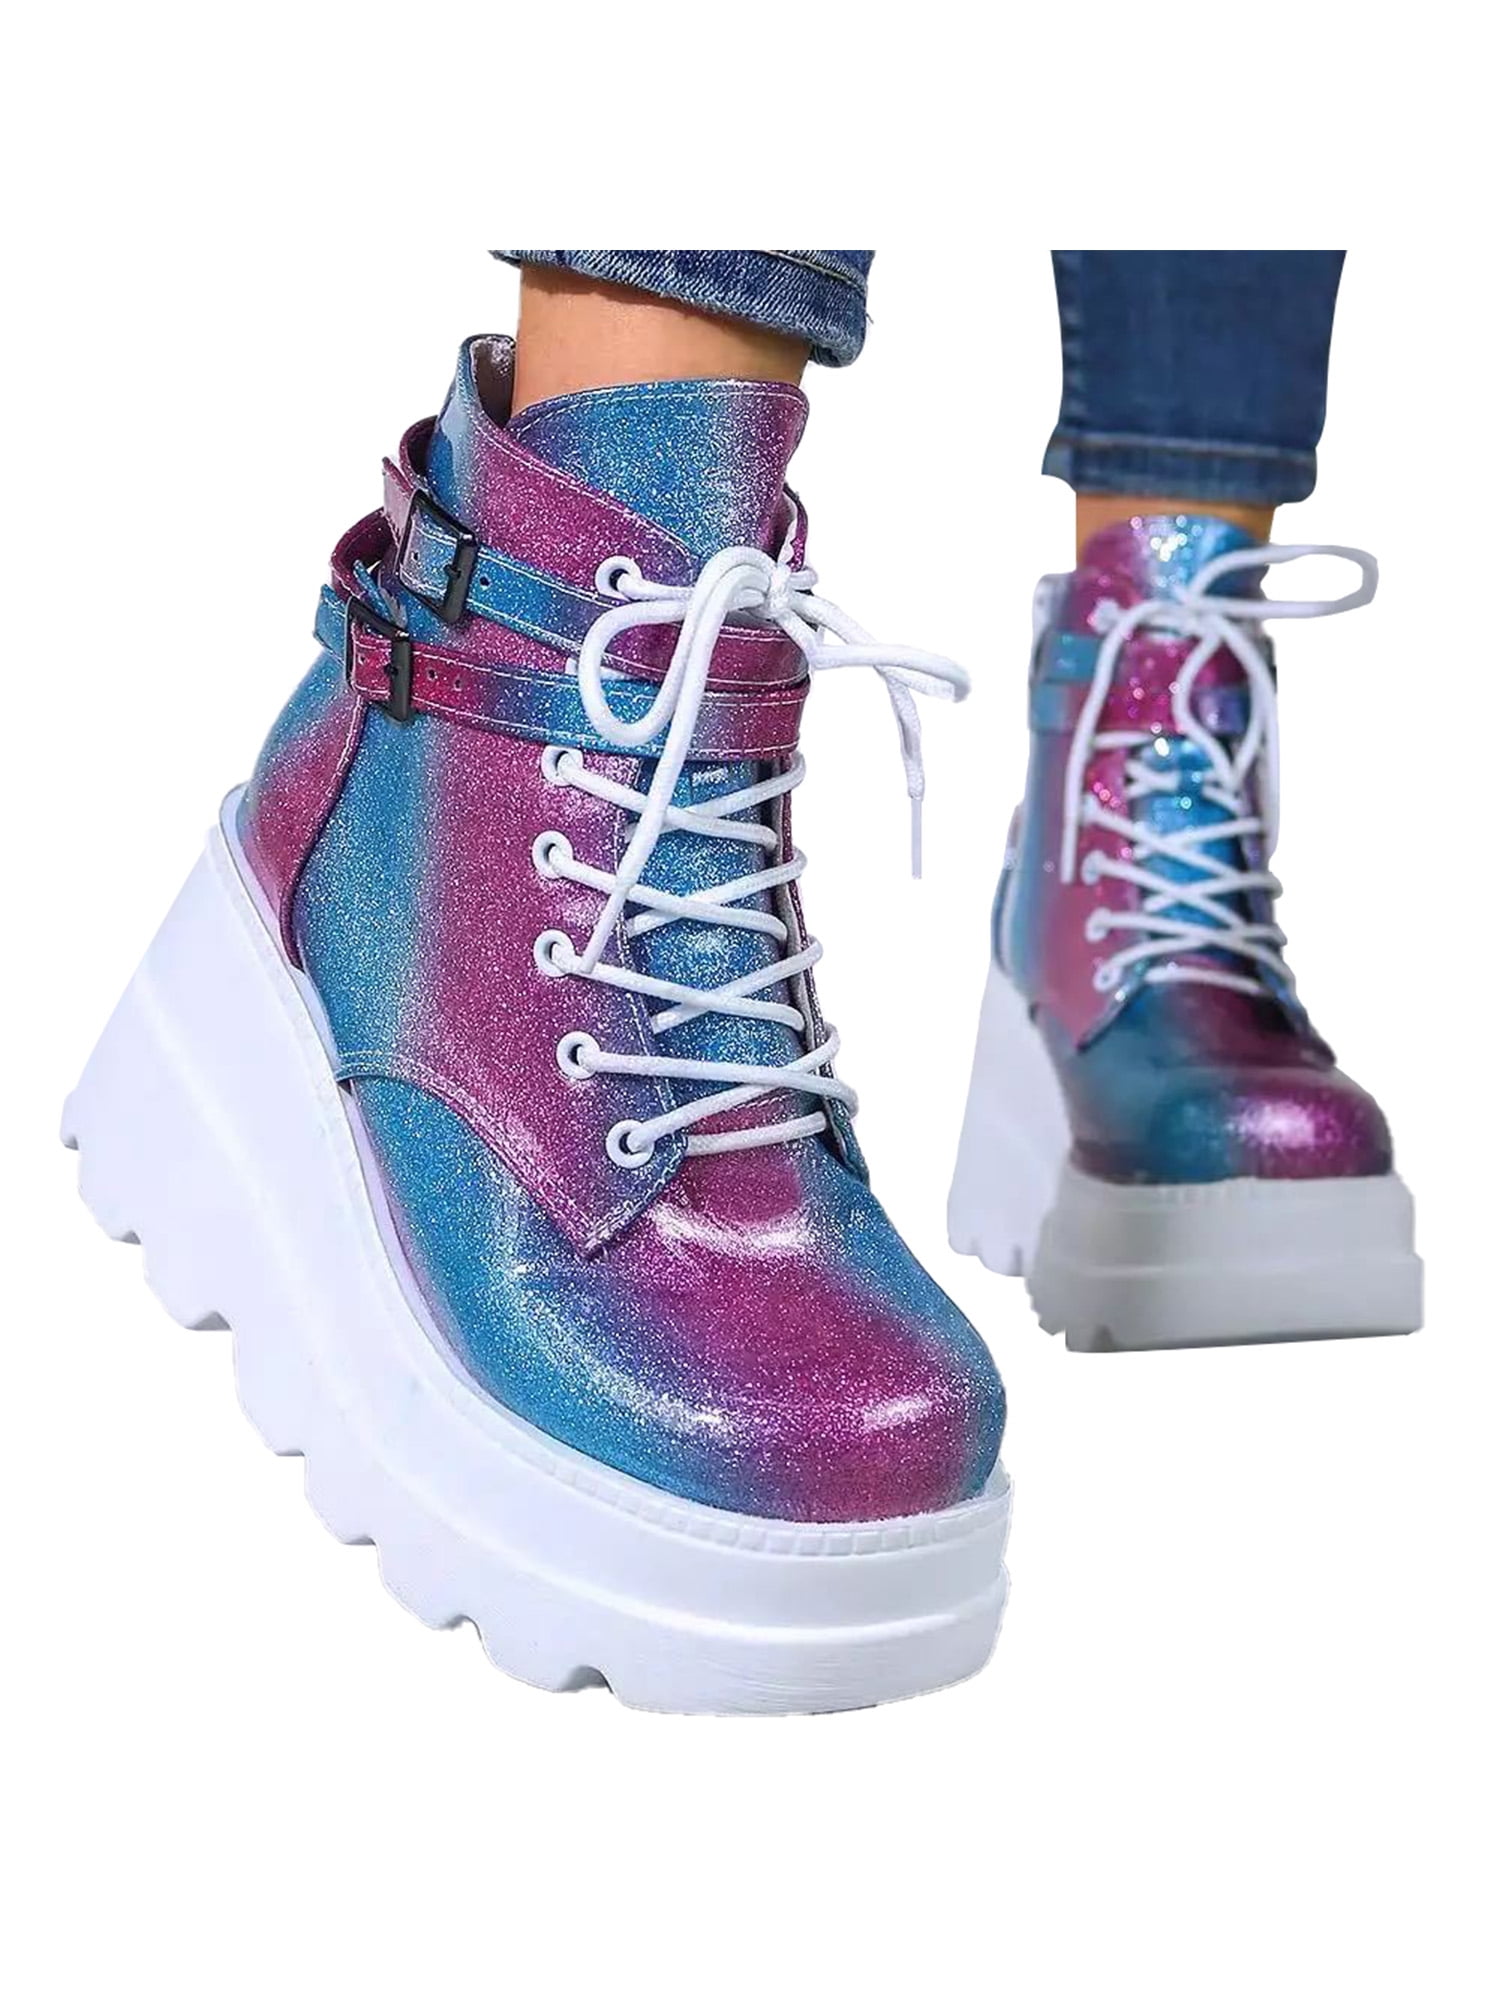 Womens High Top Chunky Platform Casual Trainers Boots Punk Goth Sneakers Shoes 